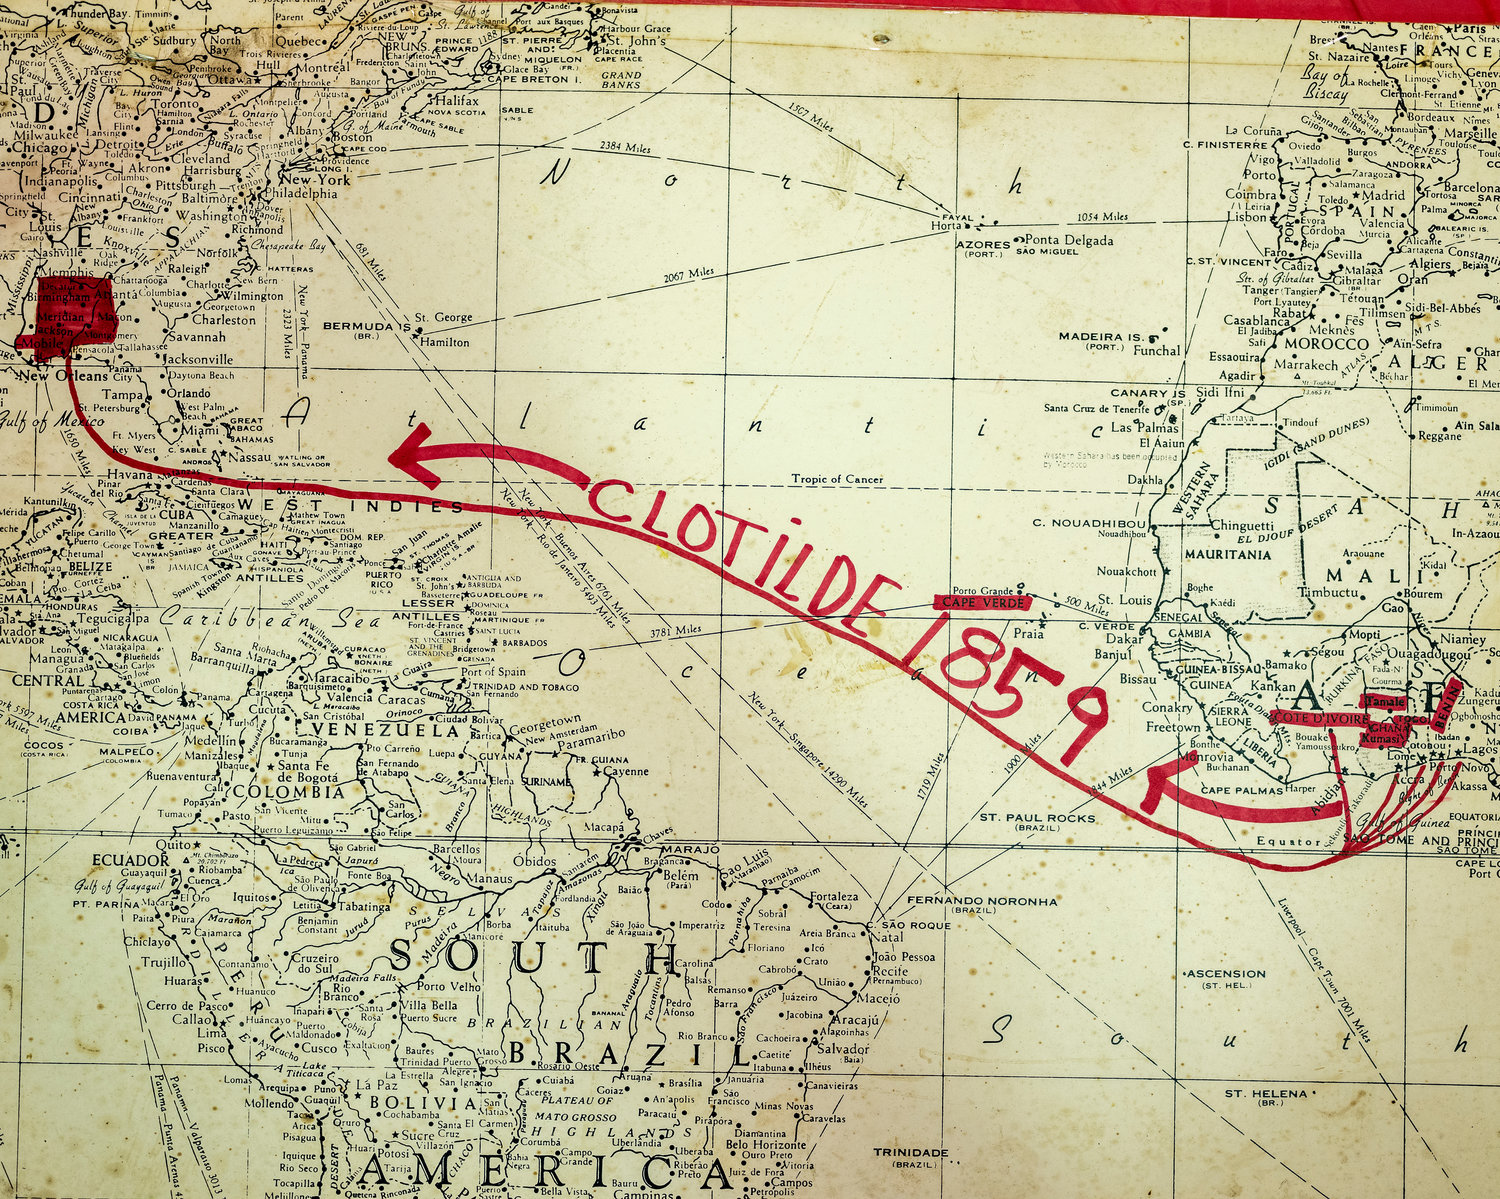 A map shows a hand-drawn path tracing the Clotilda's 1859 journey. (National Geographic/Elias Williams)